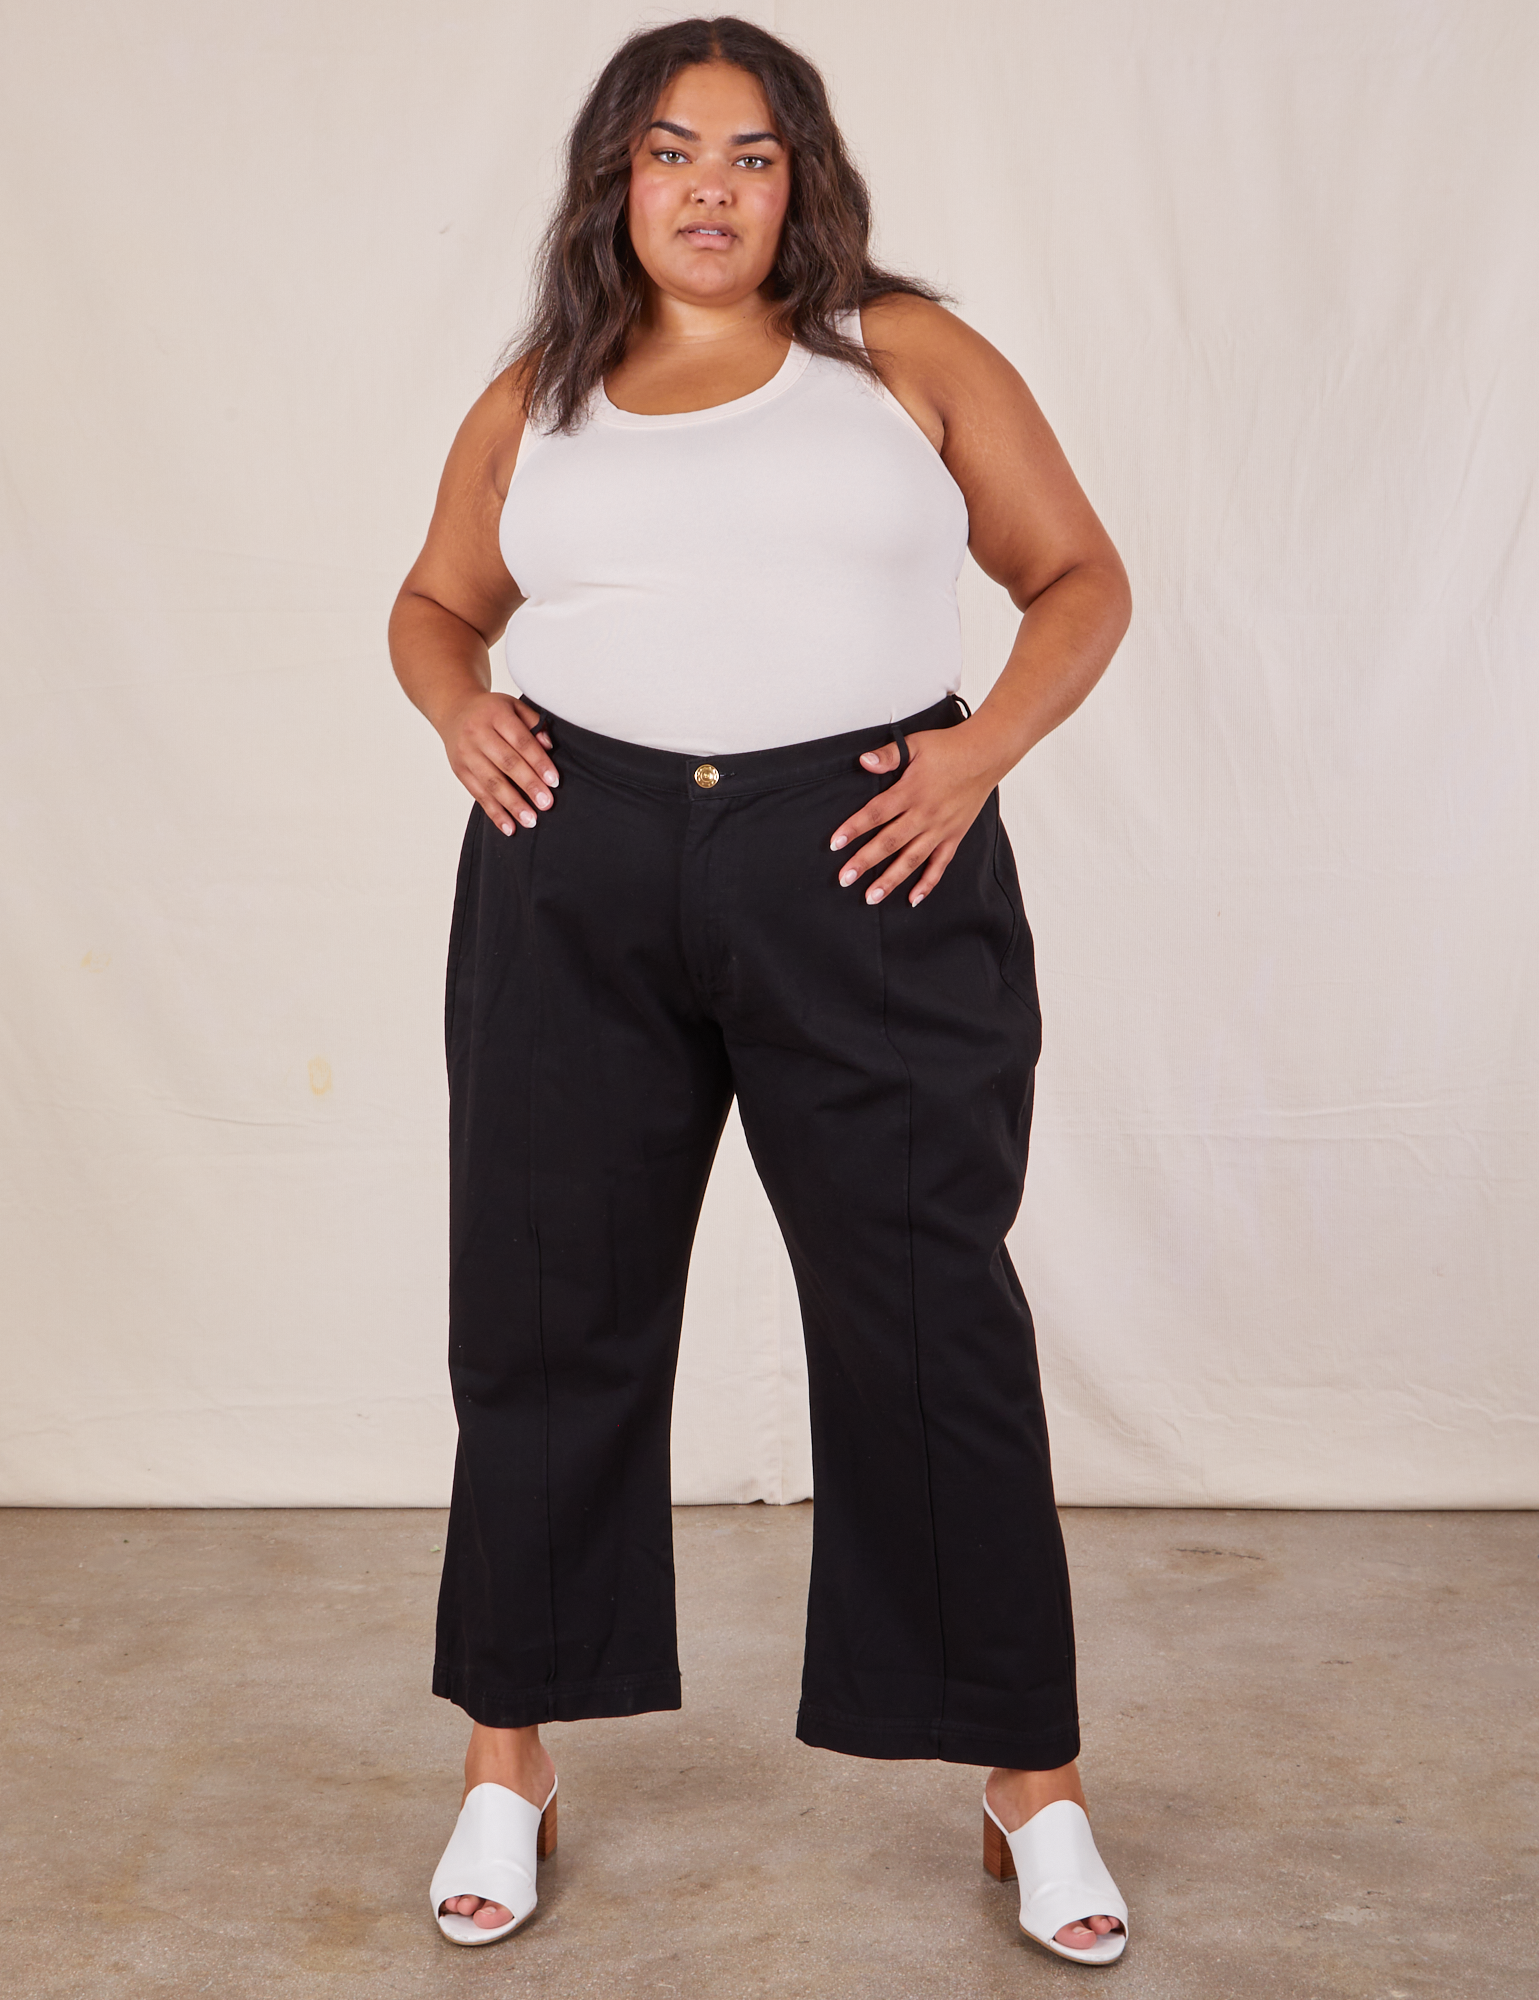 Alicia is 5&#39;9&quot; and wearing 2XL Western Pants in Basic Black paired with a vintage off-white Tank Top